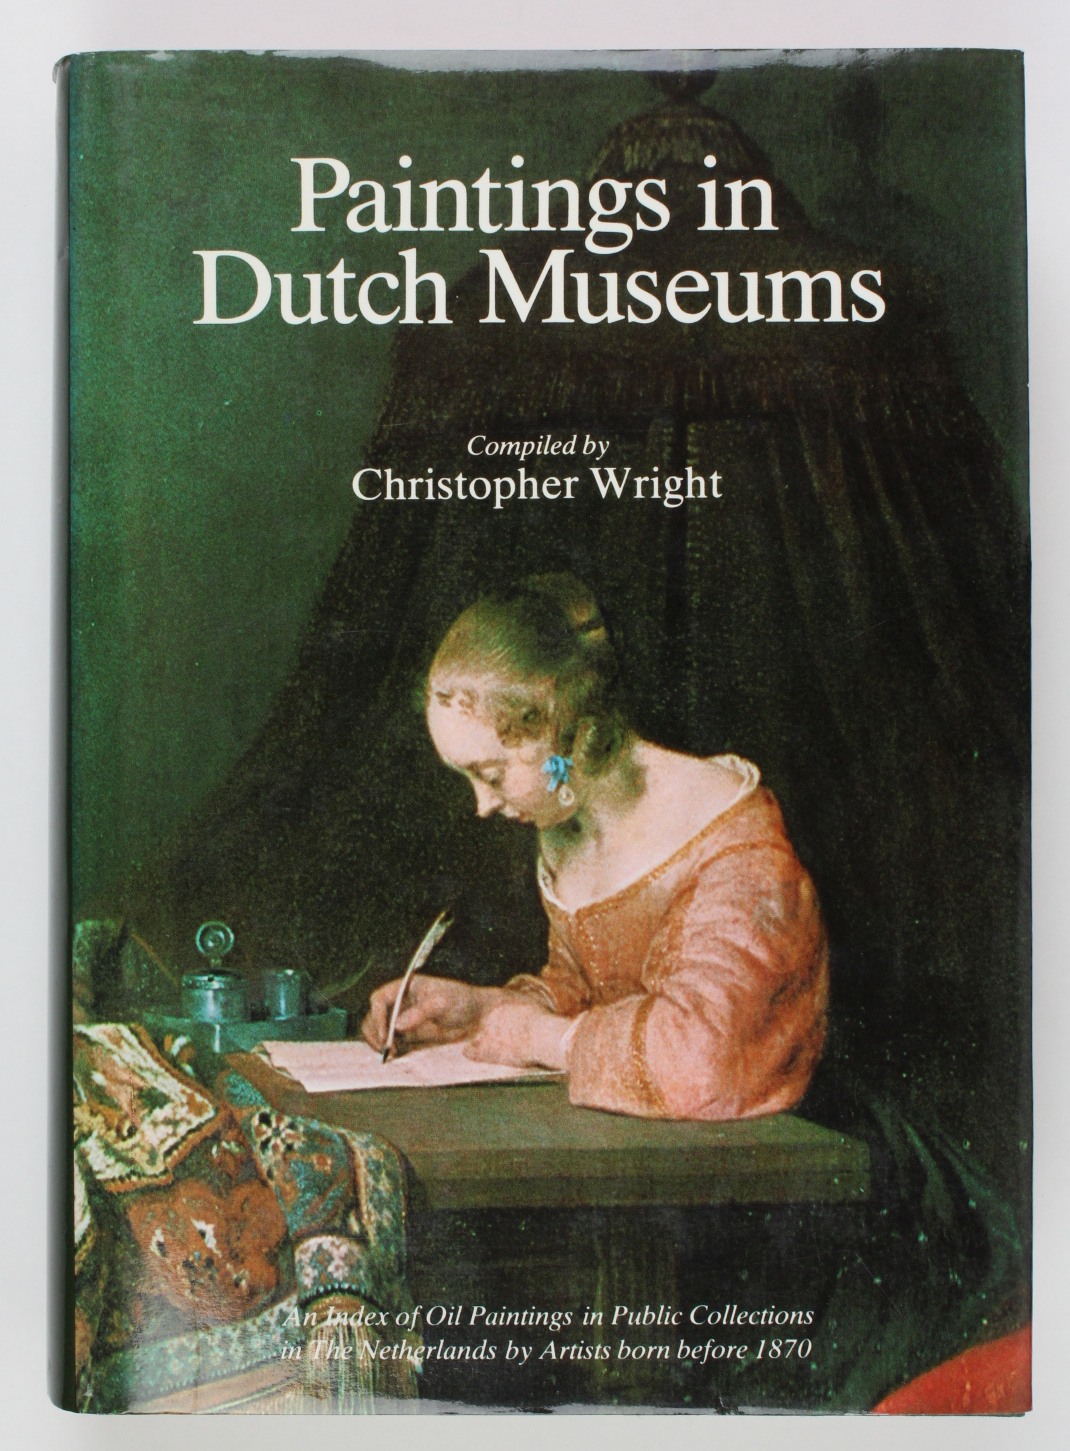 Paintings in Dutch Museums: An Index of Oil Paintings in Public Collections in the Netherlands by Artists Born Before 1870 - Wright, Christopher